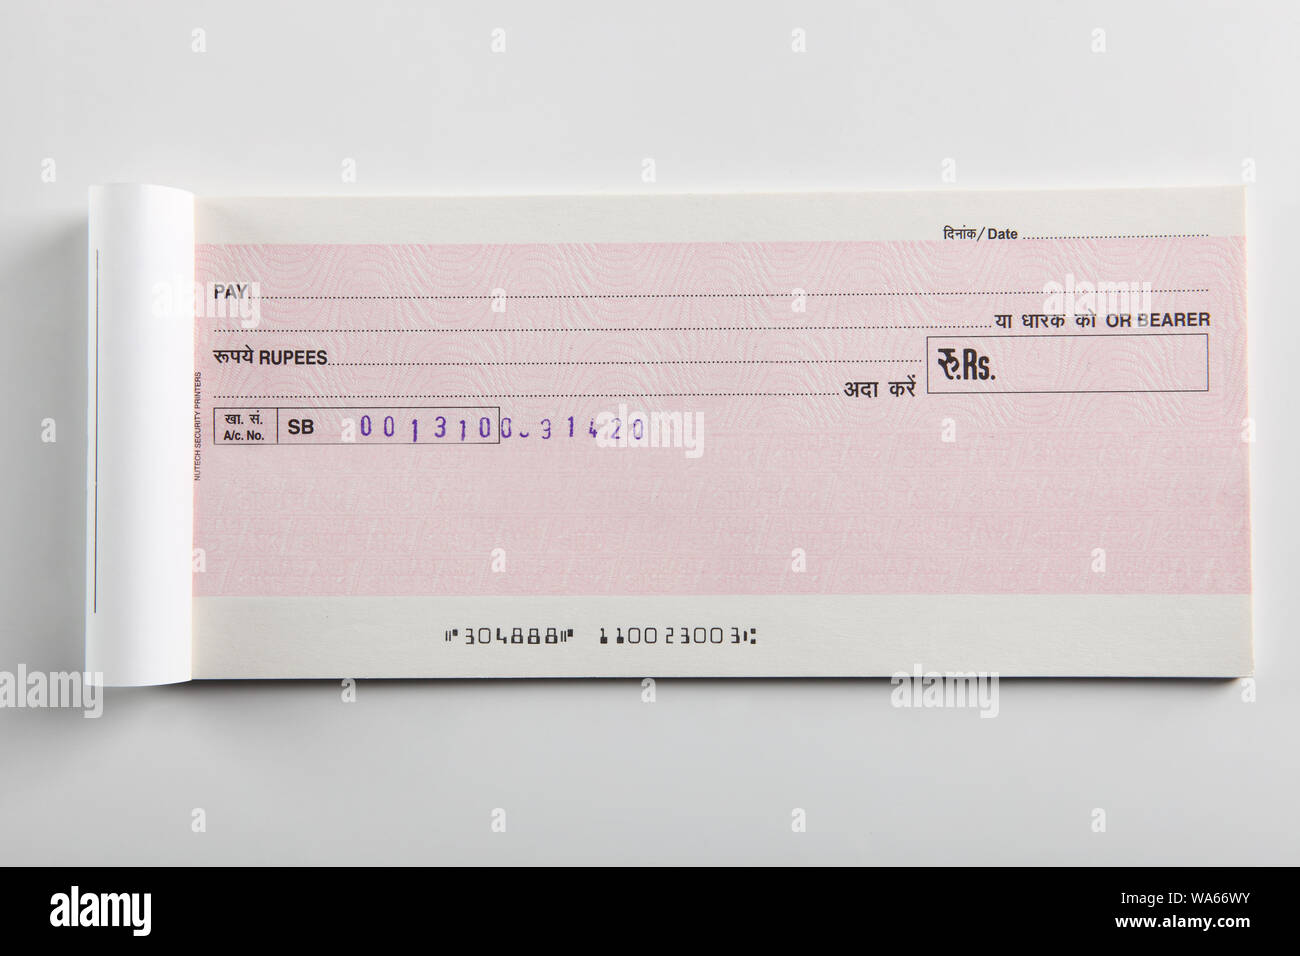 Blank Cheque High Resolution Stock Photography and Images - Alamy